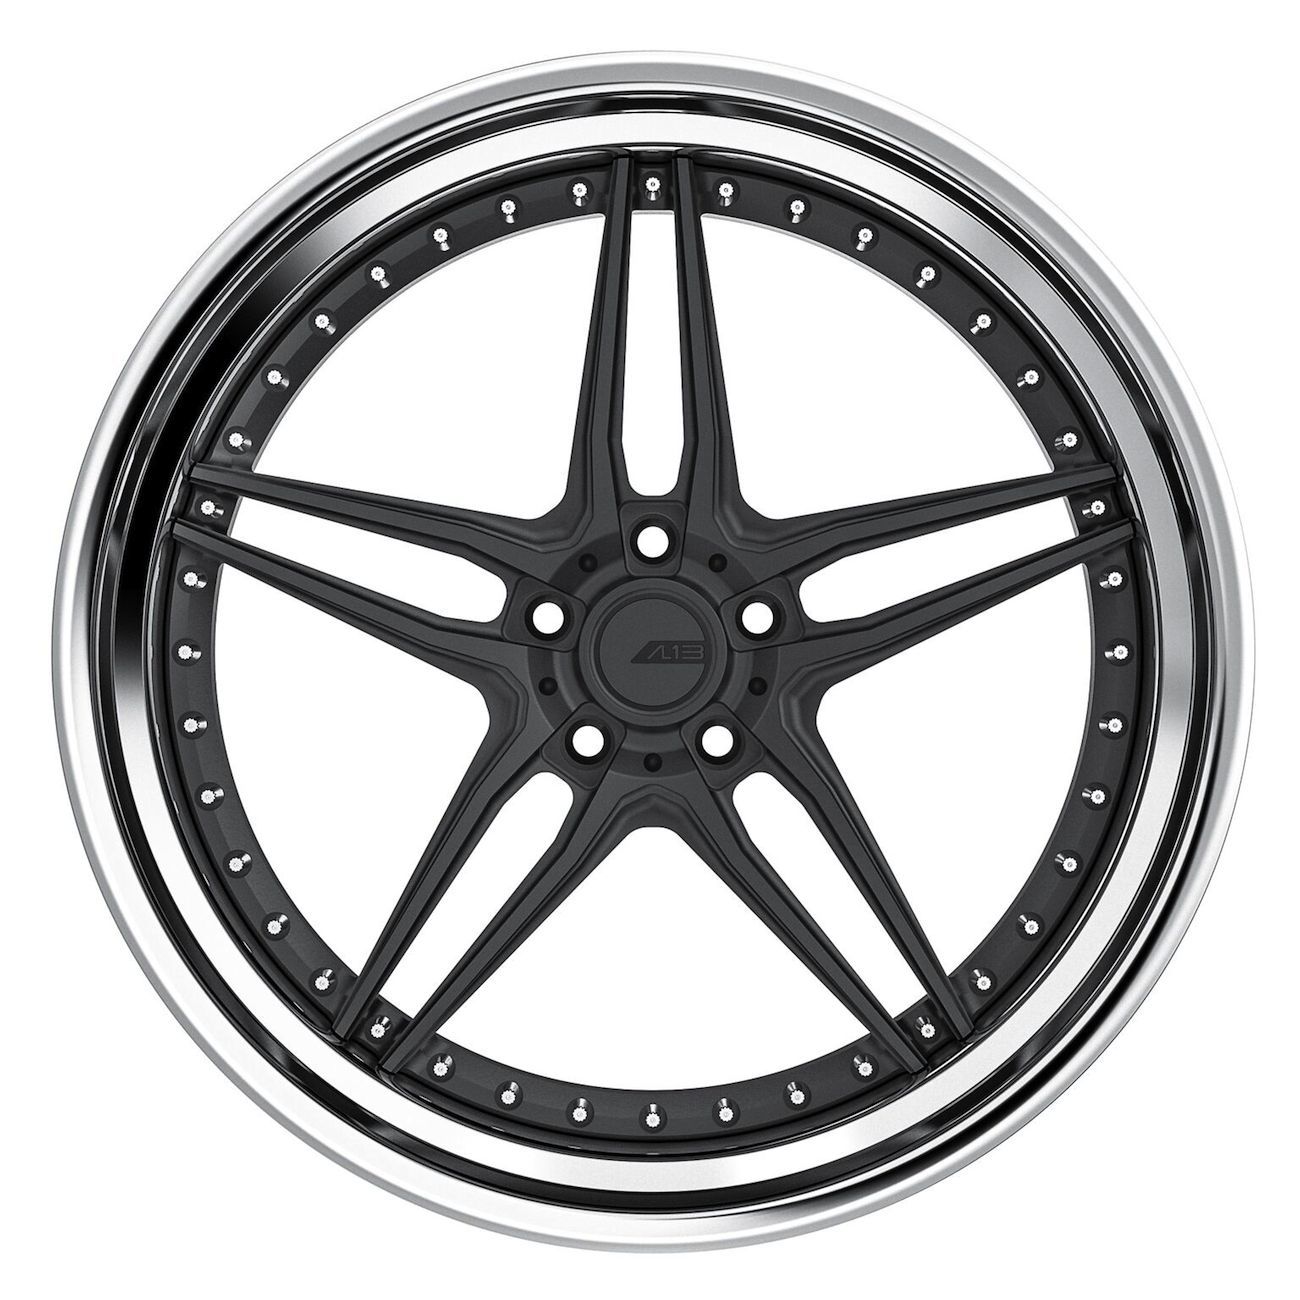 AL 13 forged wheels DS005